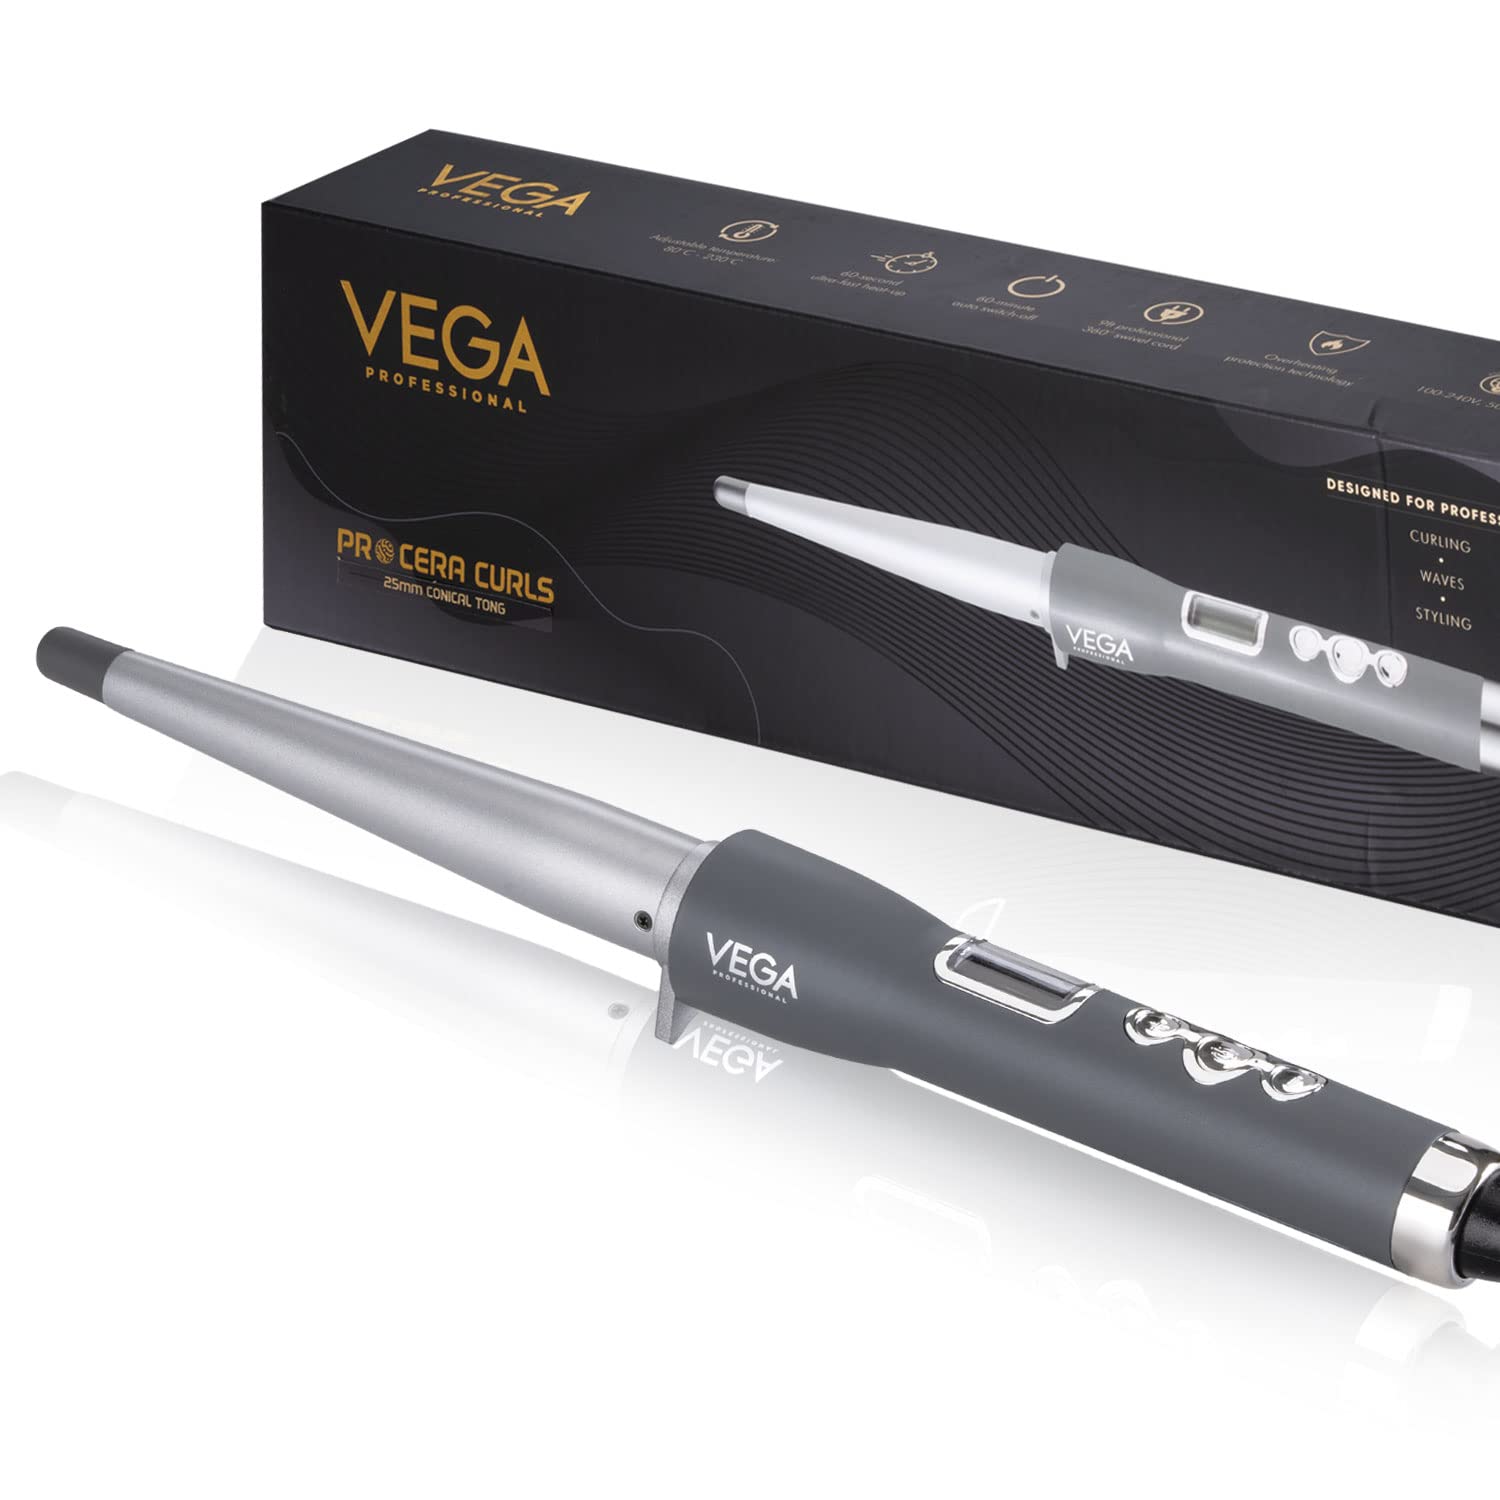 VEGA Professional Pro Cera Curls 19-25mm Conical Hair Curler with Adjustable Temperature, (VPMCT -08), Grey